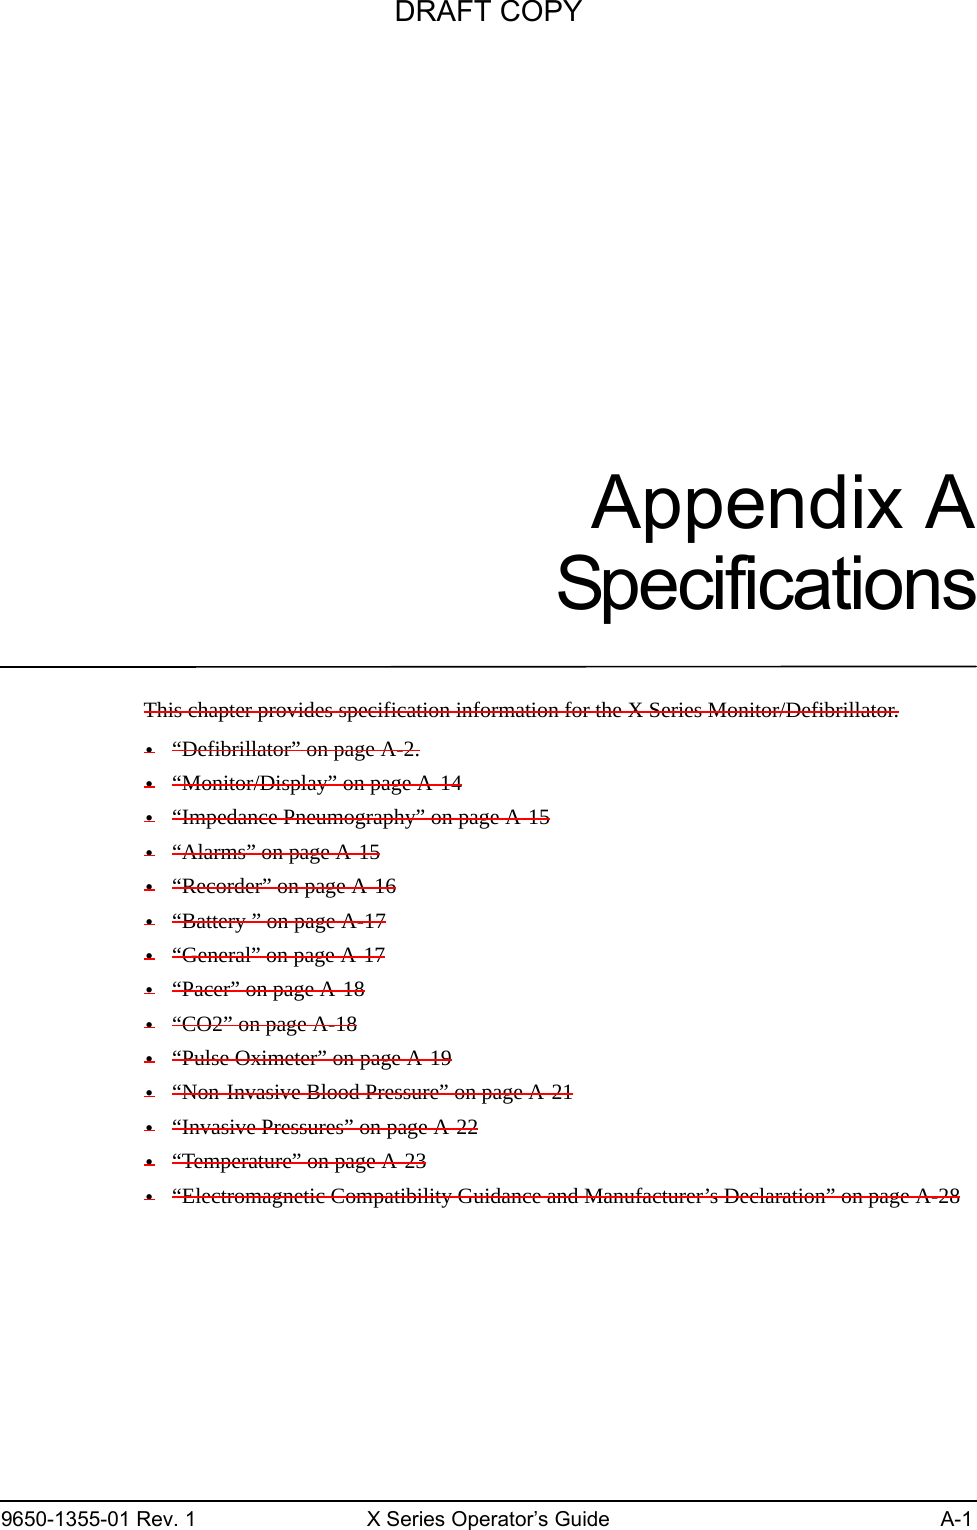 9650-1355-01 Rev. 1 X Series Operator’s Guide A-1Appendix ASpecificationsThis chapter provides specification information for the X Series Monitor/Defibrillator.•“Defibrillator” on page A-2.•“Monitor/Display” on page A-14•“Impedance Pneumography” on page A-15•“Alarms” on page A-15•“Recorder” on page A-16•“Battery ” on page A-17•“General” on page A-17•“Pacer” on page A-18•“CO2” on page A-18•“Pulse Oximeter” on page A-19•“Non-Invasive Blood Pressure” on page A-21•“Invasive Pressures” on page A-22•“Temperature” on page A-23•“Electromagnetic Compatibility Guidance and Manufacturer’s Declaration” on page A-28DRAFT COPY